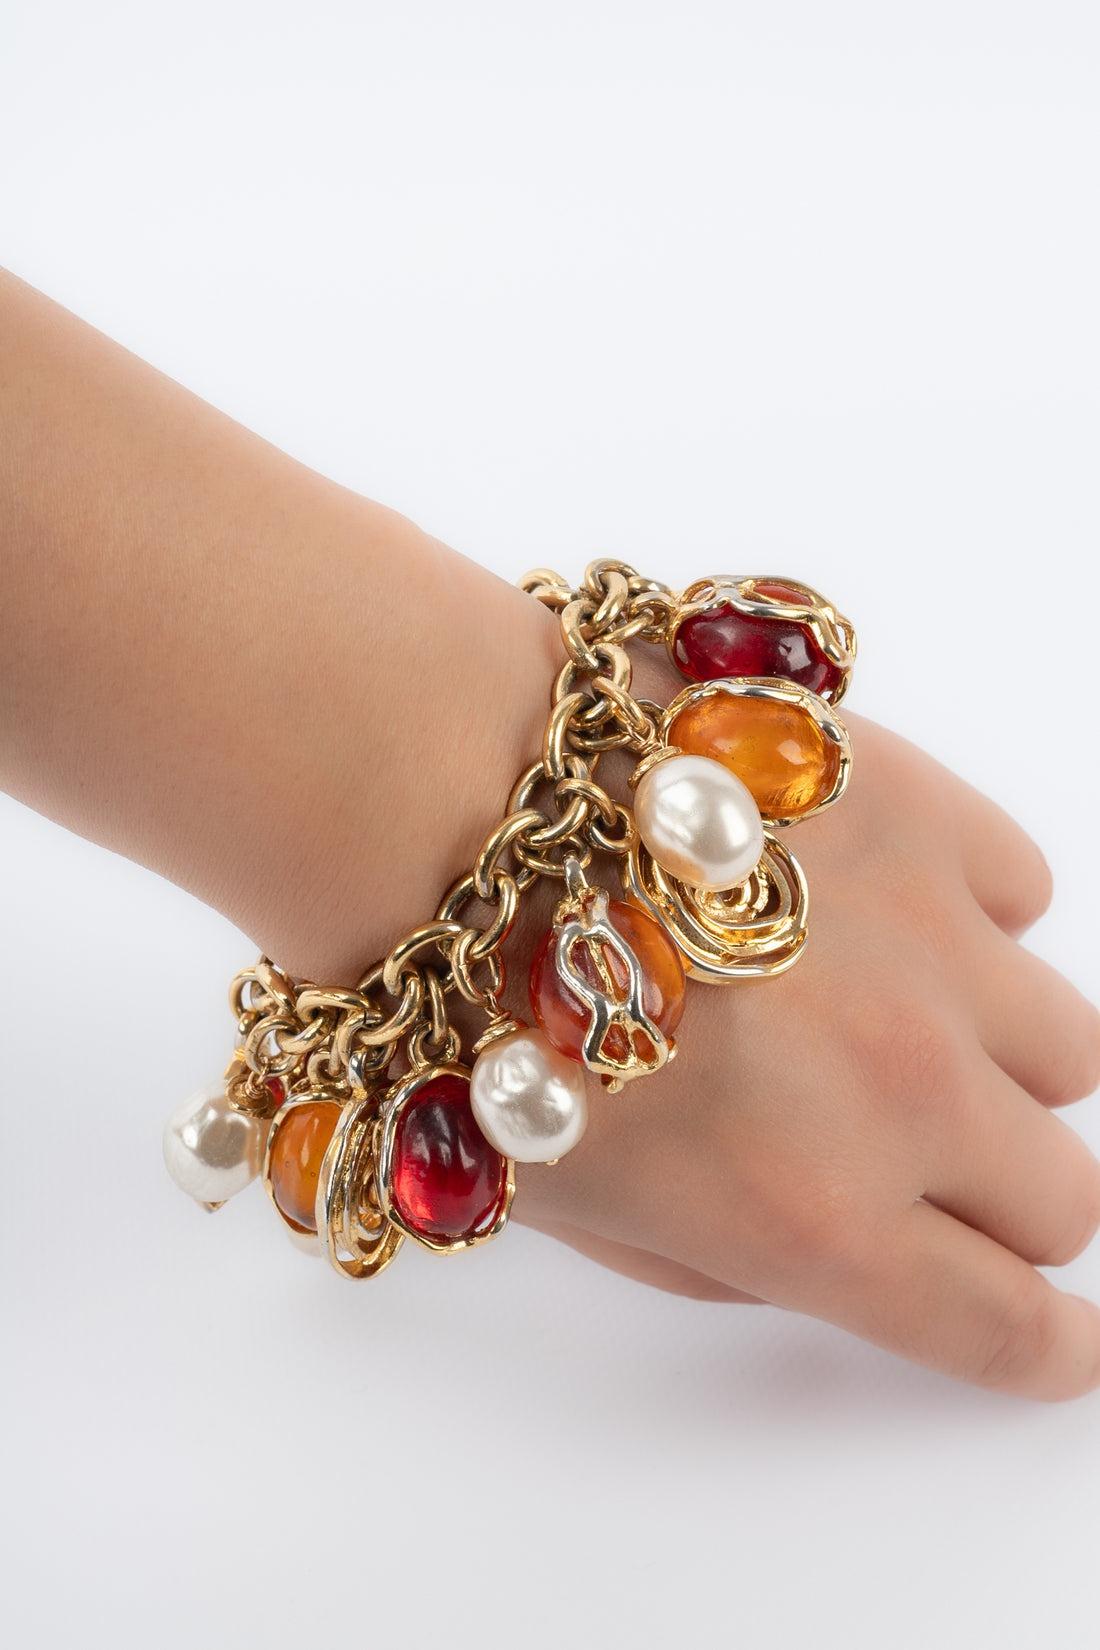 Yves Saint Laurent - (Made in France) Golden metal bracelet with costume pearls and resin cabochons.

Additional information:
Condition: Very good condition
Dimensions: Length: from 18 cm to 21 cm

Seller Reference: BRA46